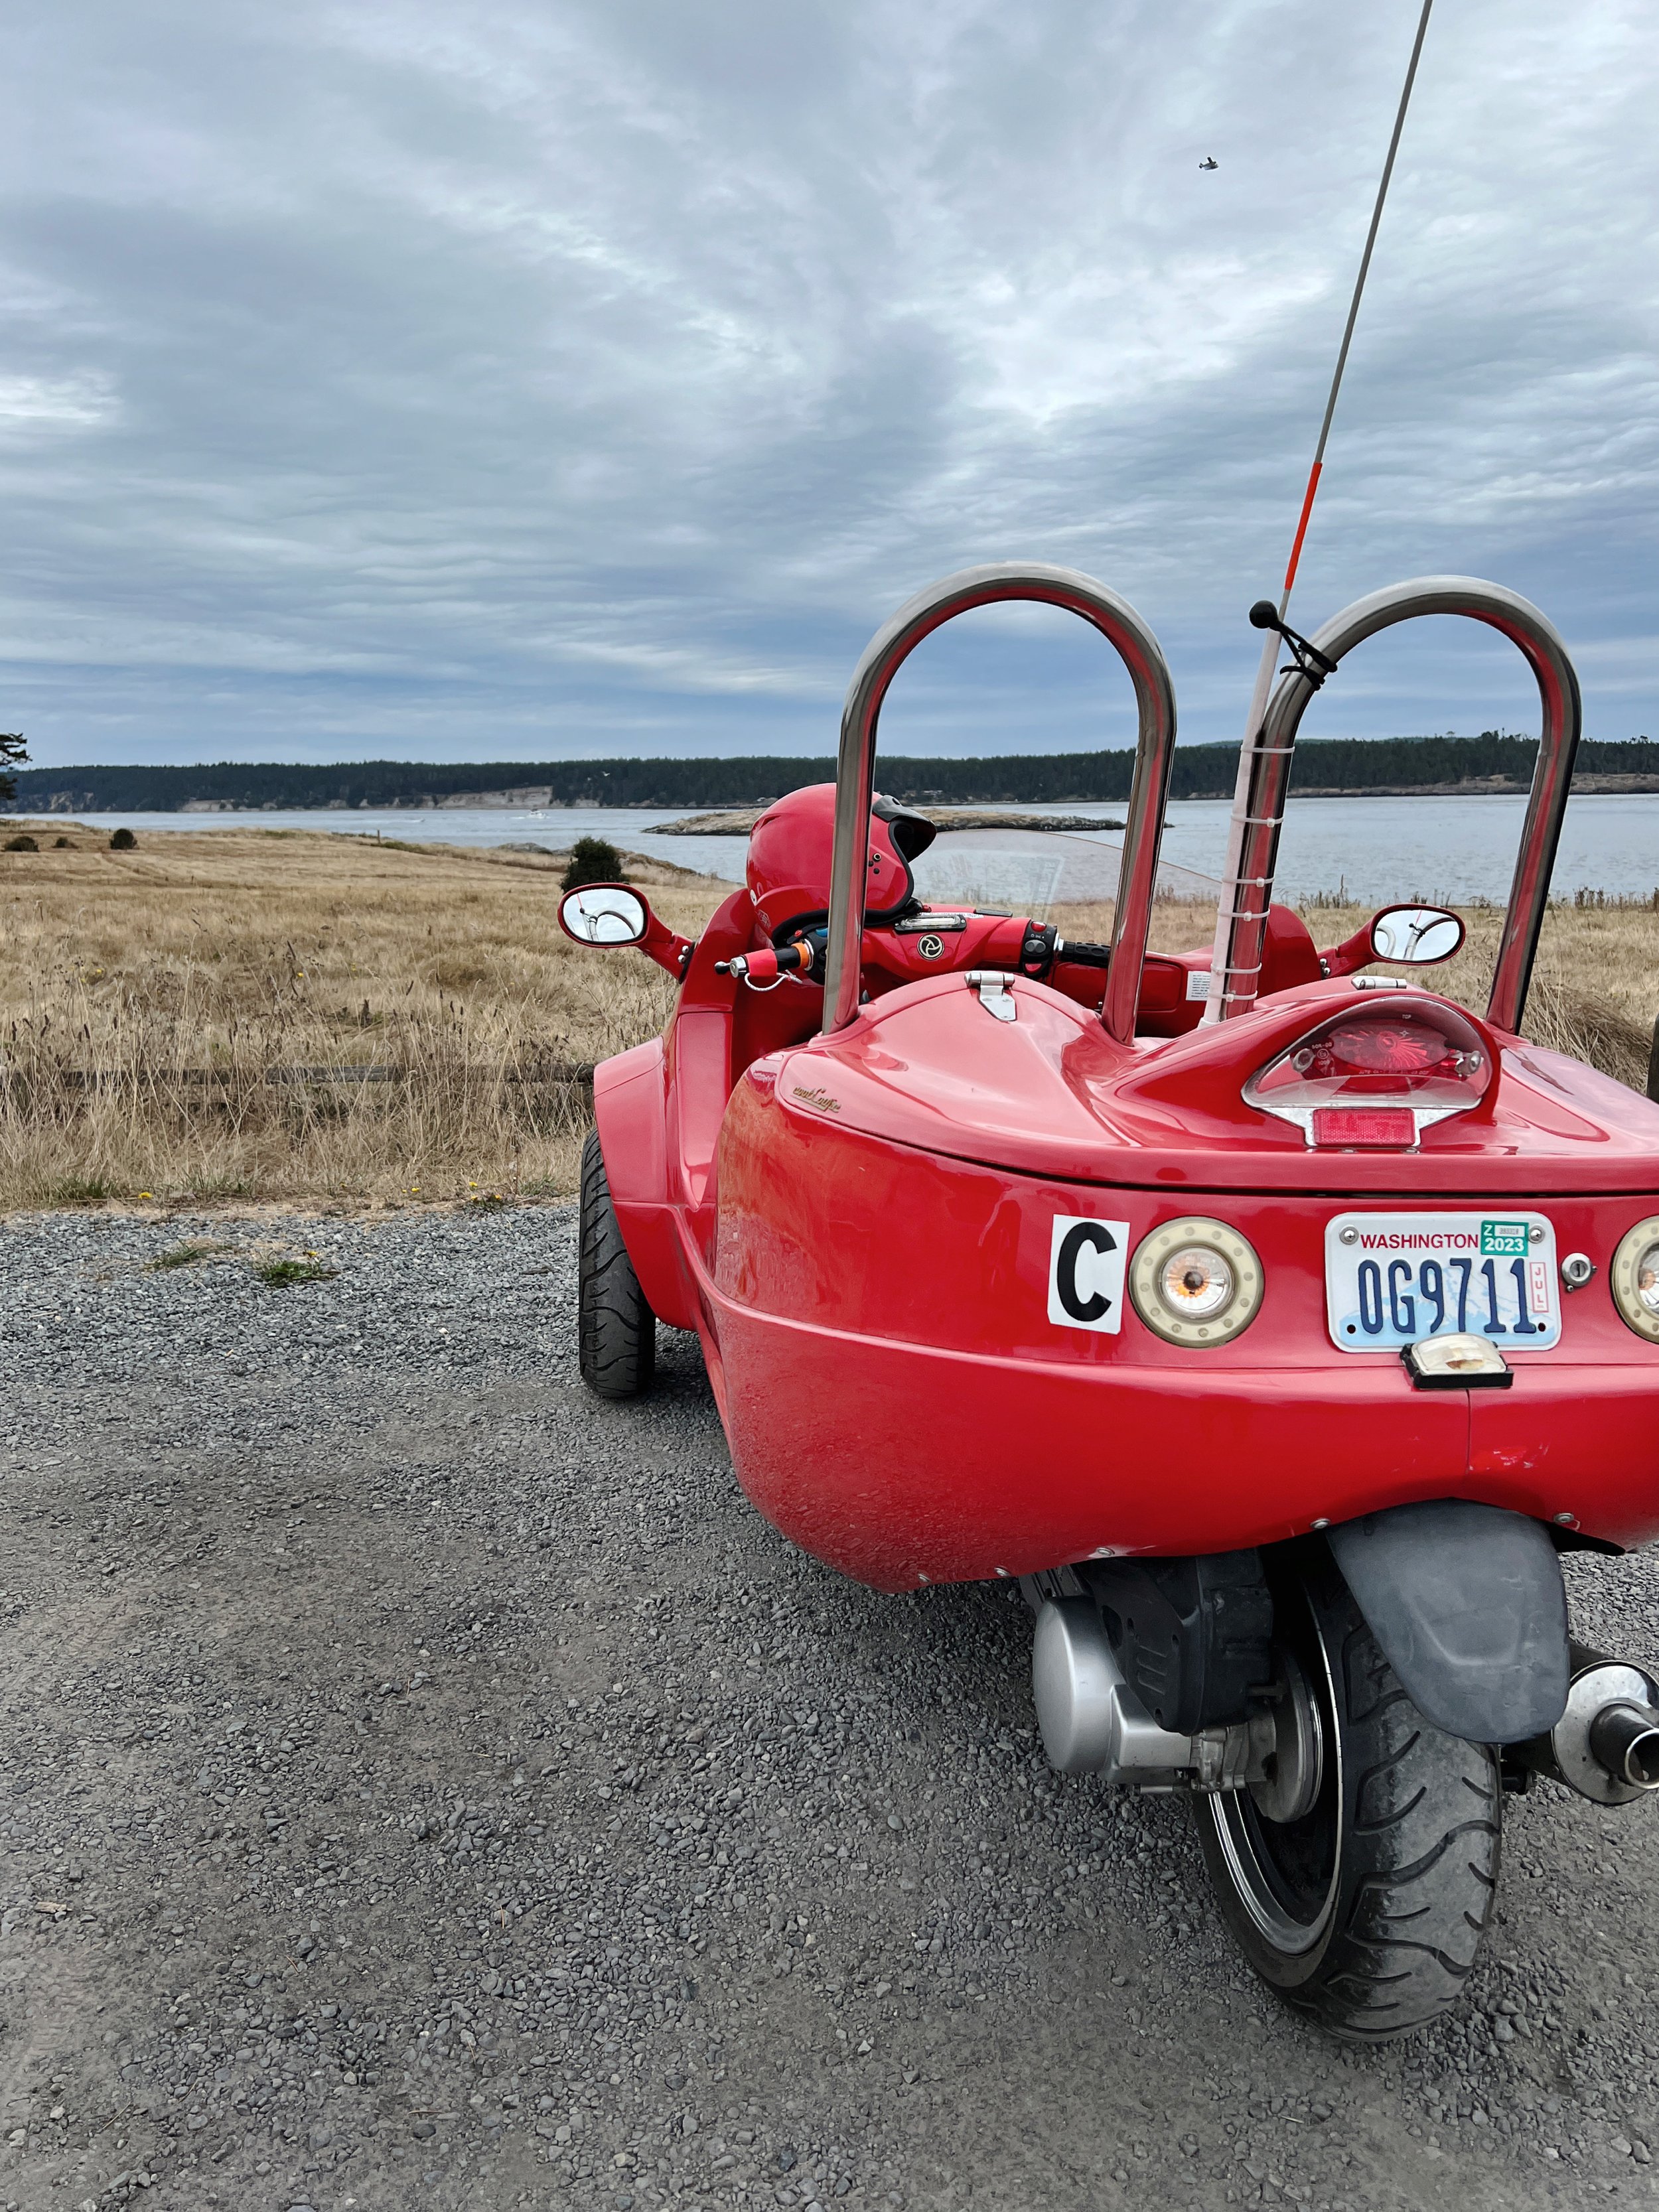 Susies Mopeds San Juan Island Full Review Scoot Coupe (Copy)